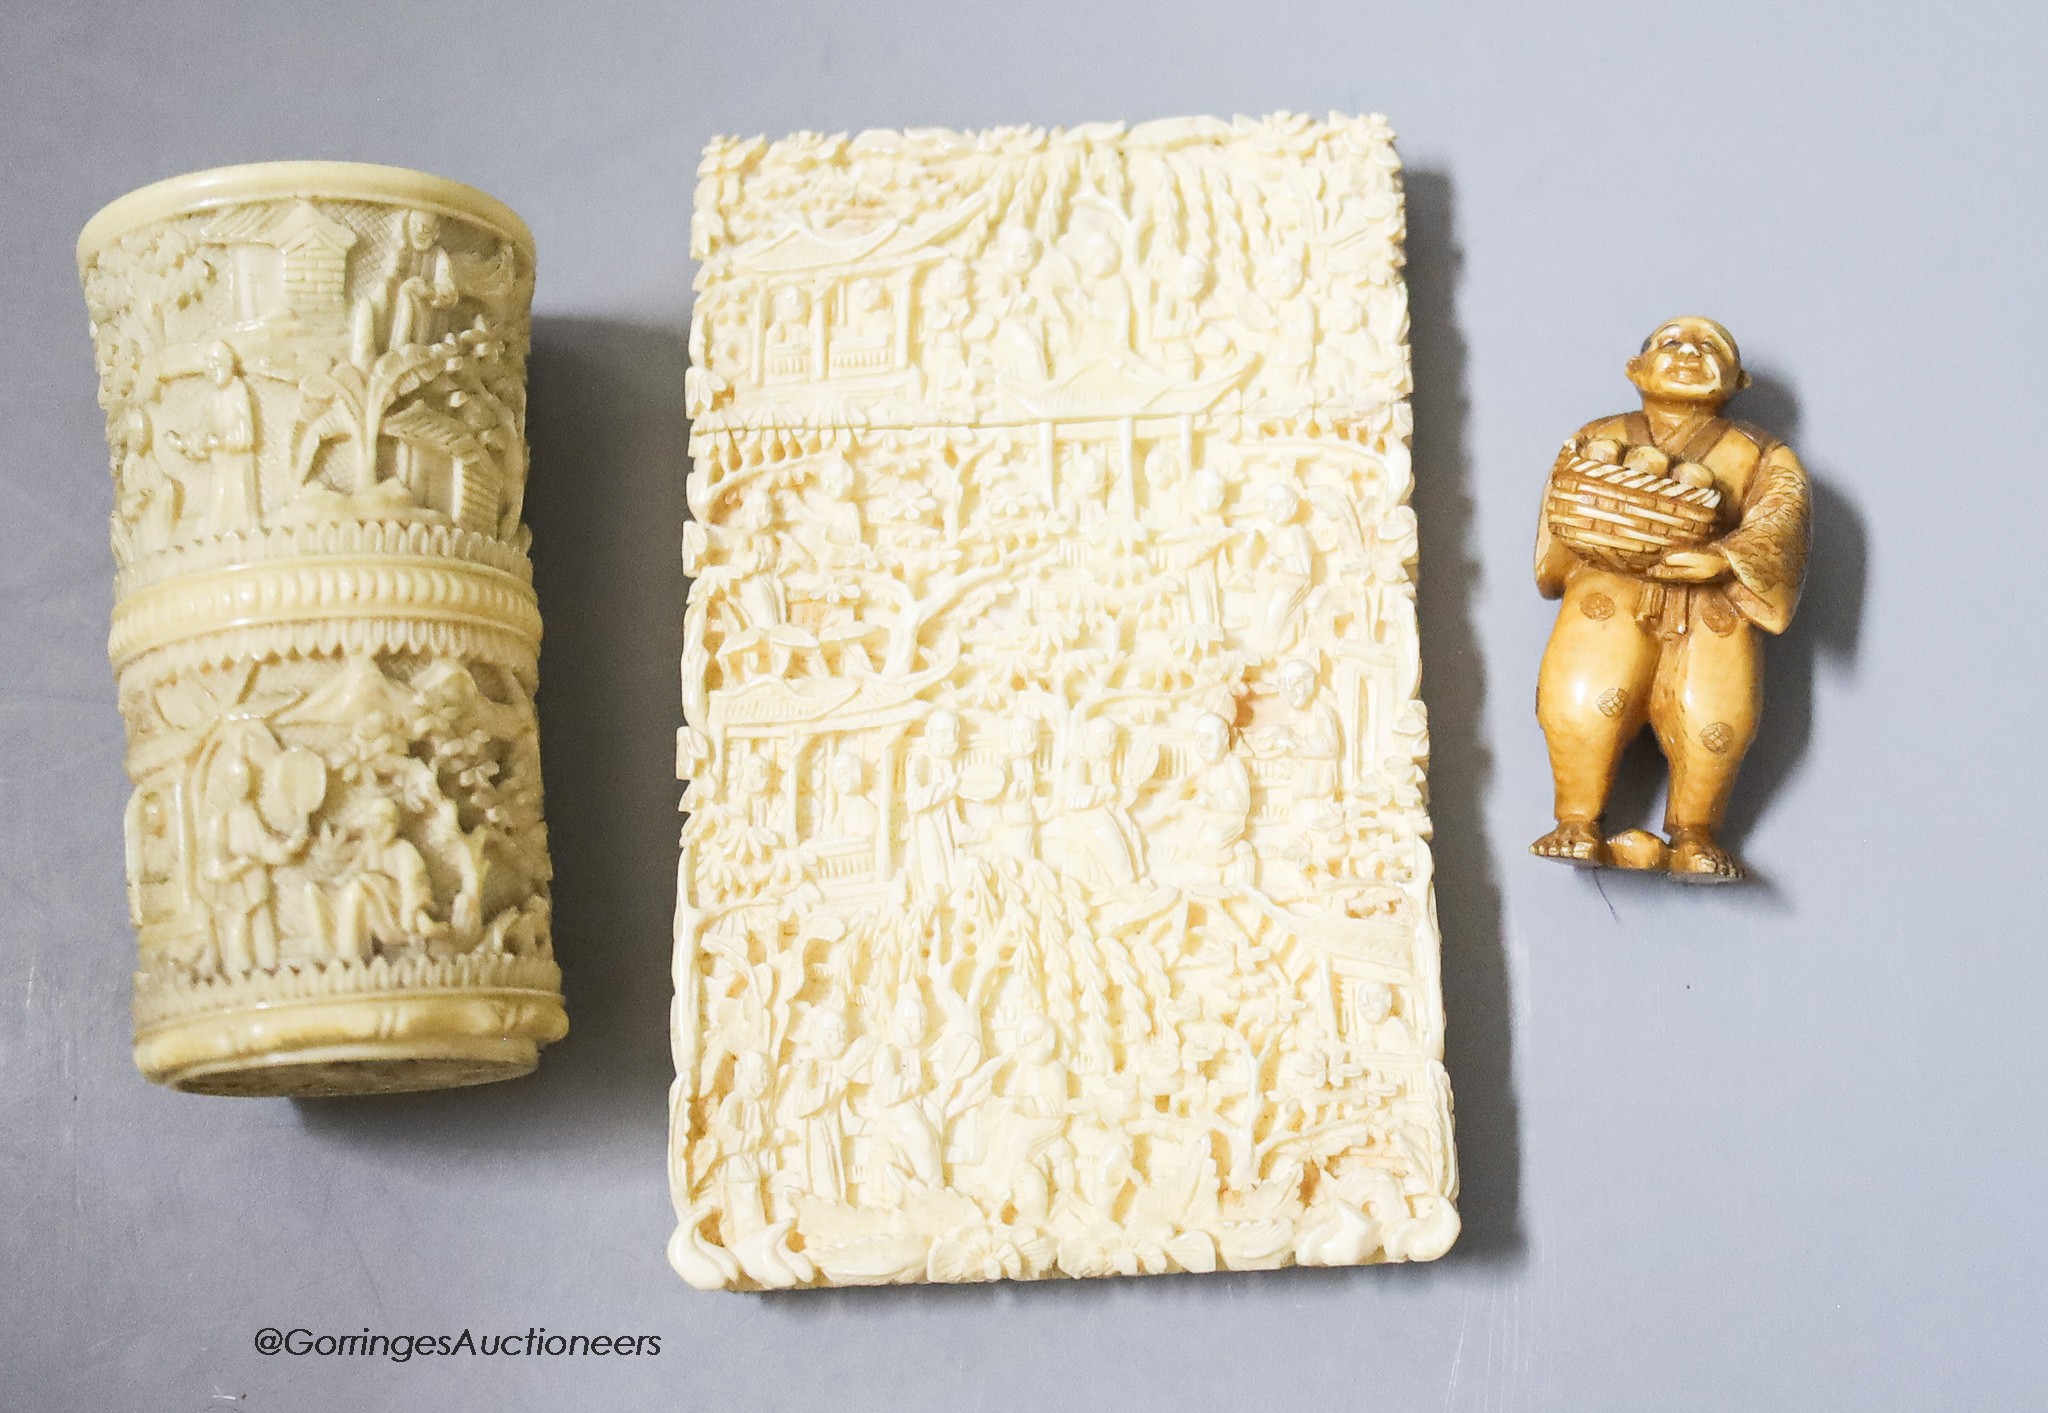 A Canton ivory card case, 11 x 7cm, a dice shaker and a Japanese netsuke